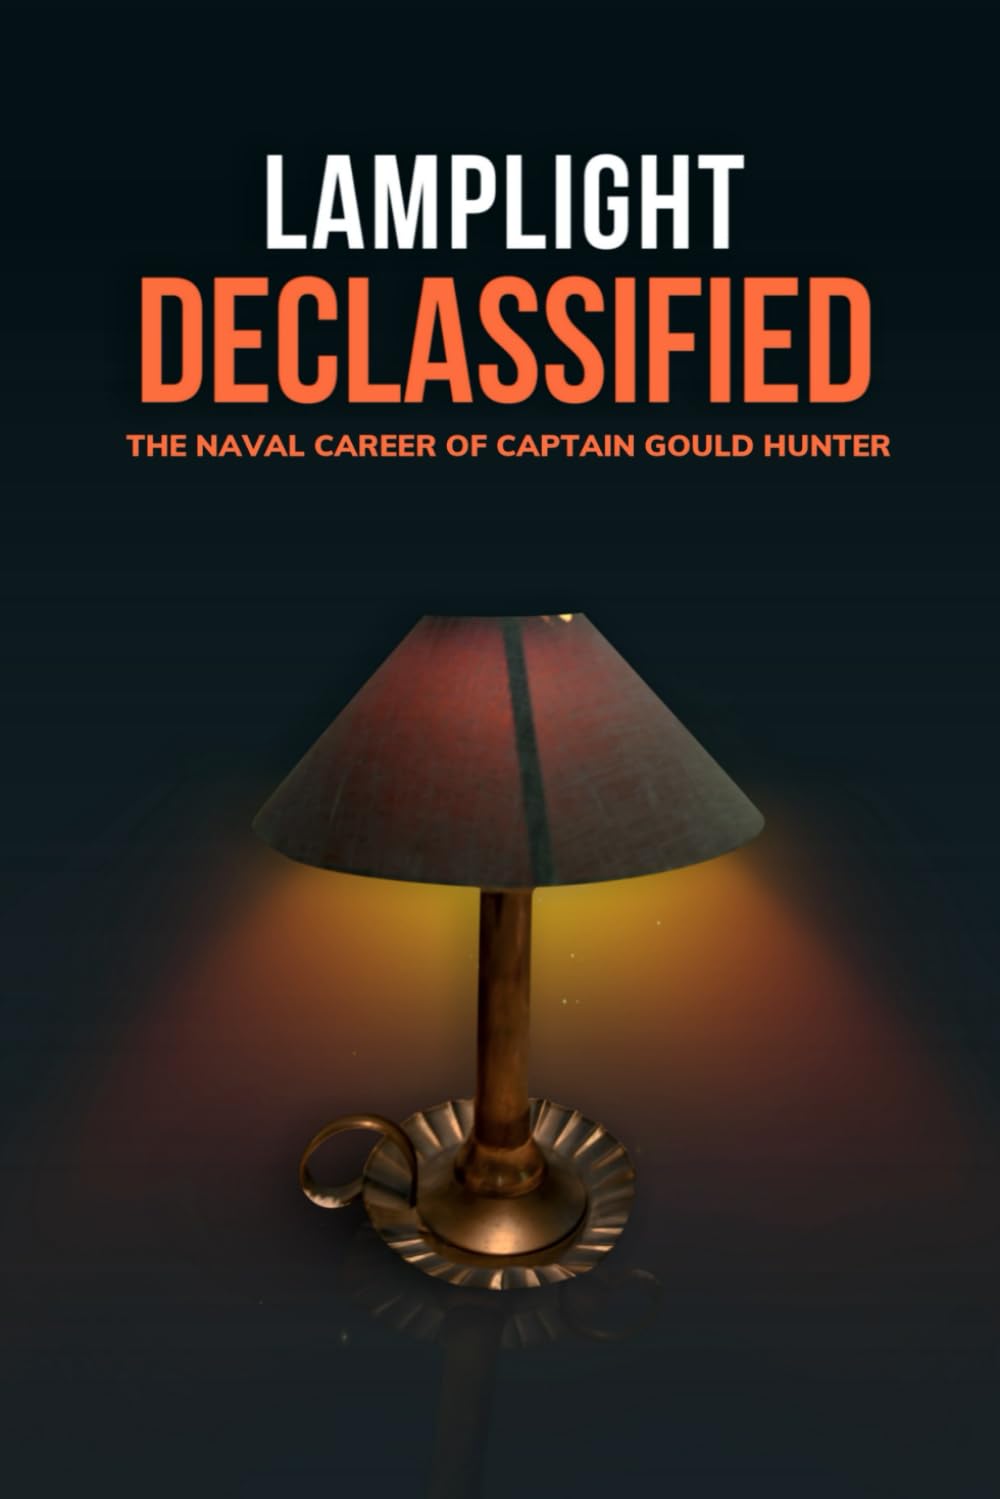 LAMPLIGHT DECLASSIFIED: The Naval Career of Captain Gould Hunter